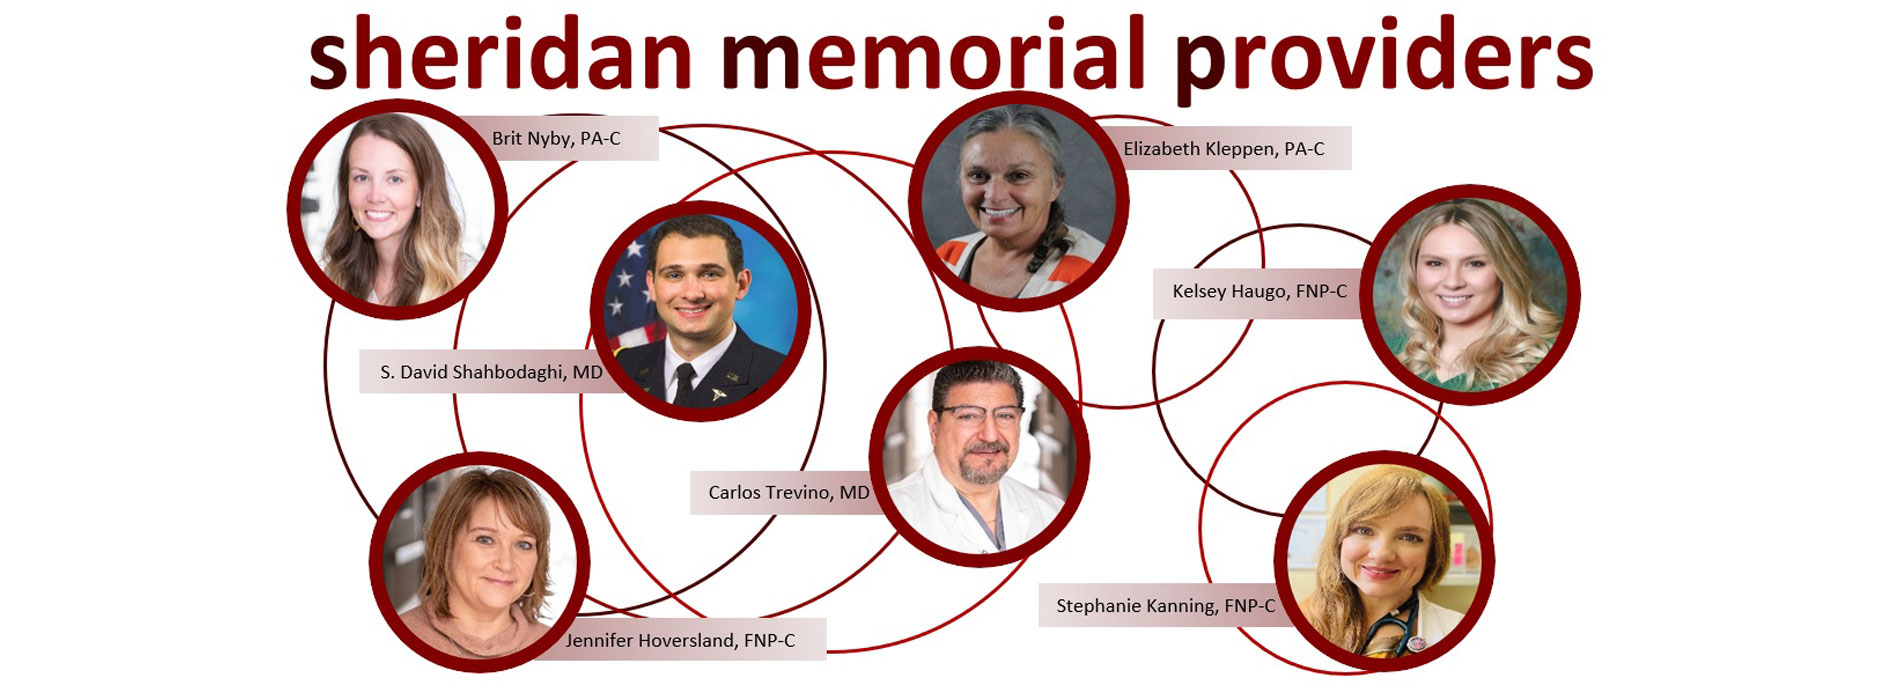 Sheridan Memorial Providers.
Provider photos in circles with names and credentials. 
Brit Nyby, PA-C, Elizabeth Kleppen, PA-C, S.David Shahbodaghi, MD, Carlos Trevino, MD, Kelsey Haugo, FNP-C, Jennifer Hoversland, FNP-C, Stephanie Kanning, FNP-C.